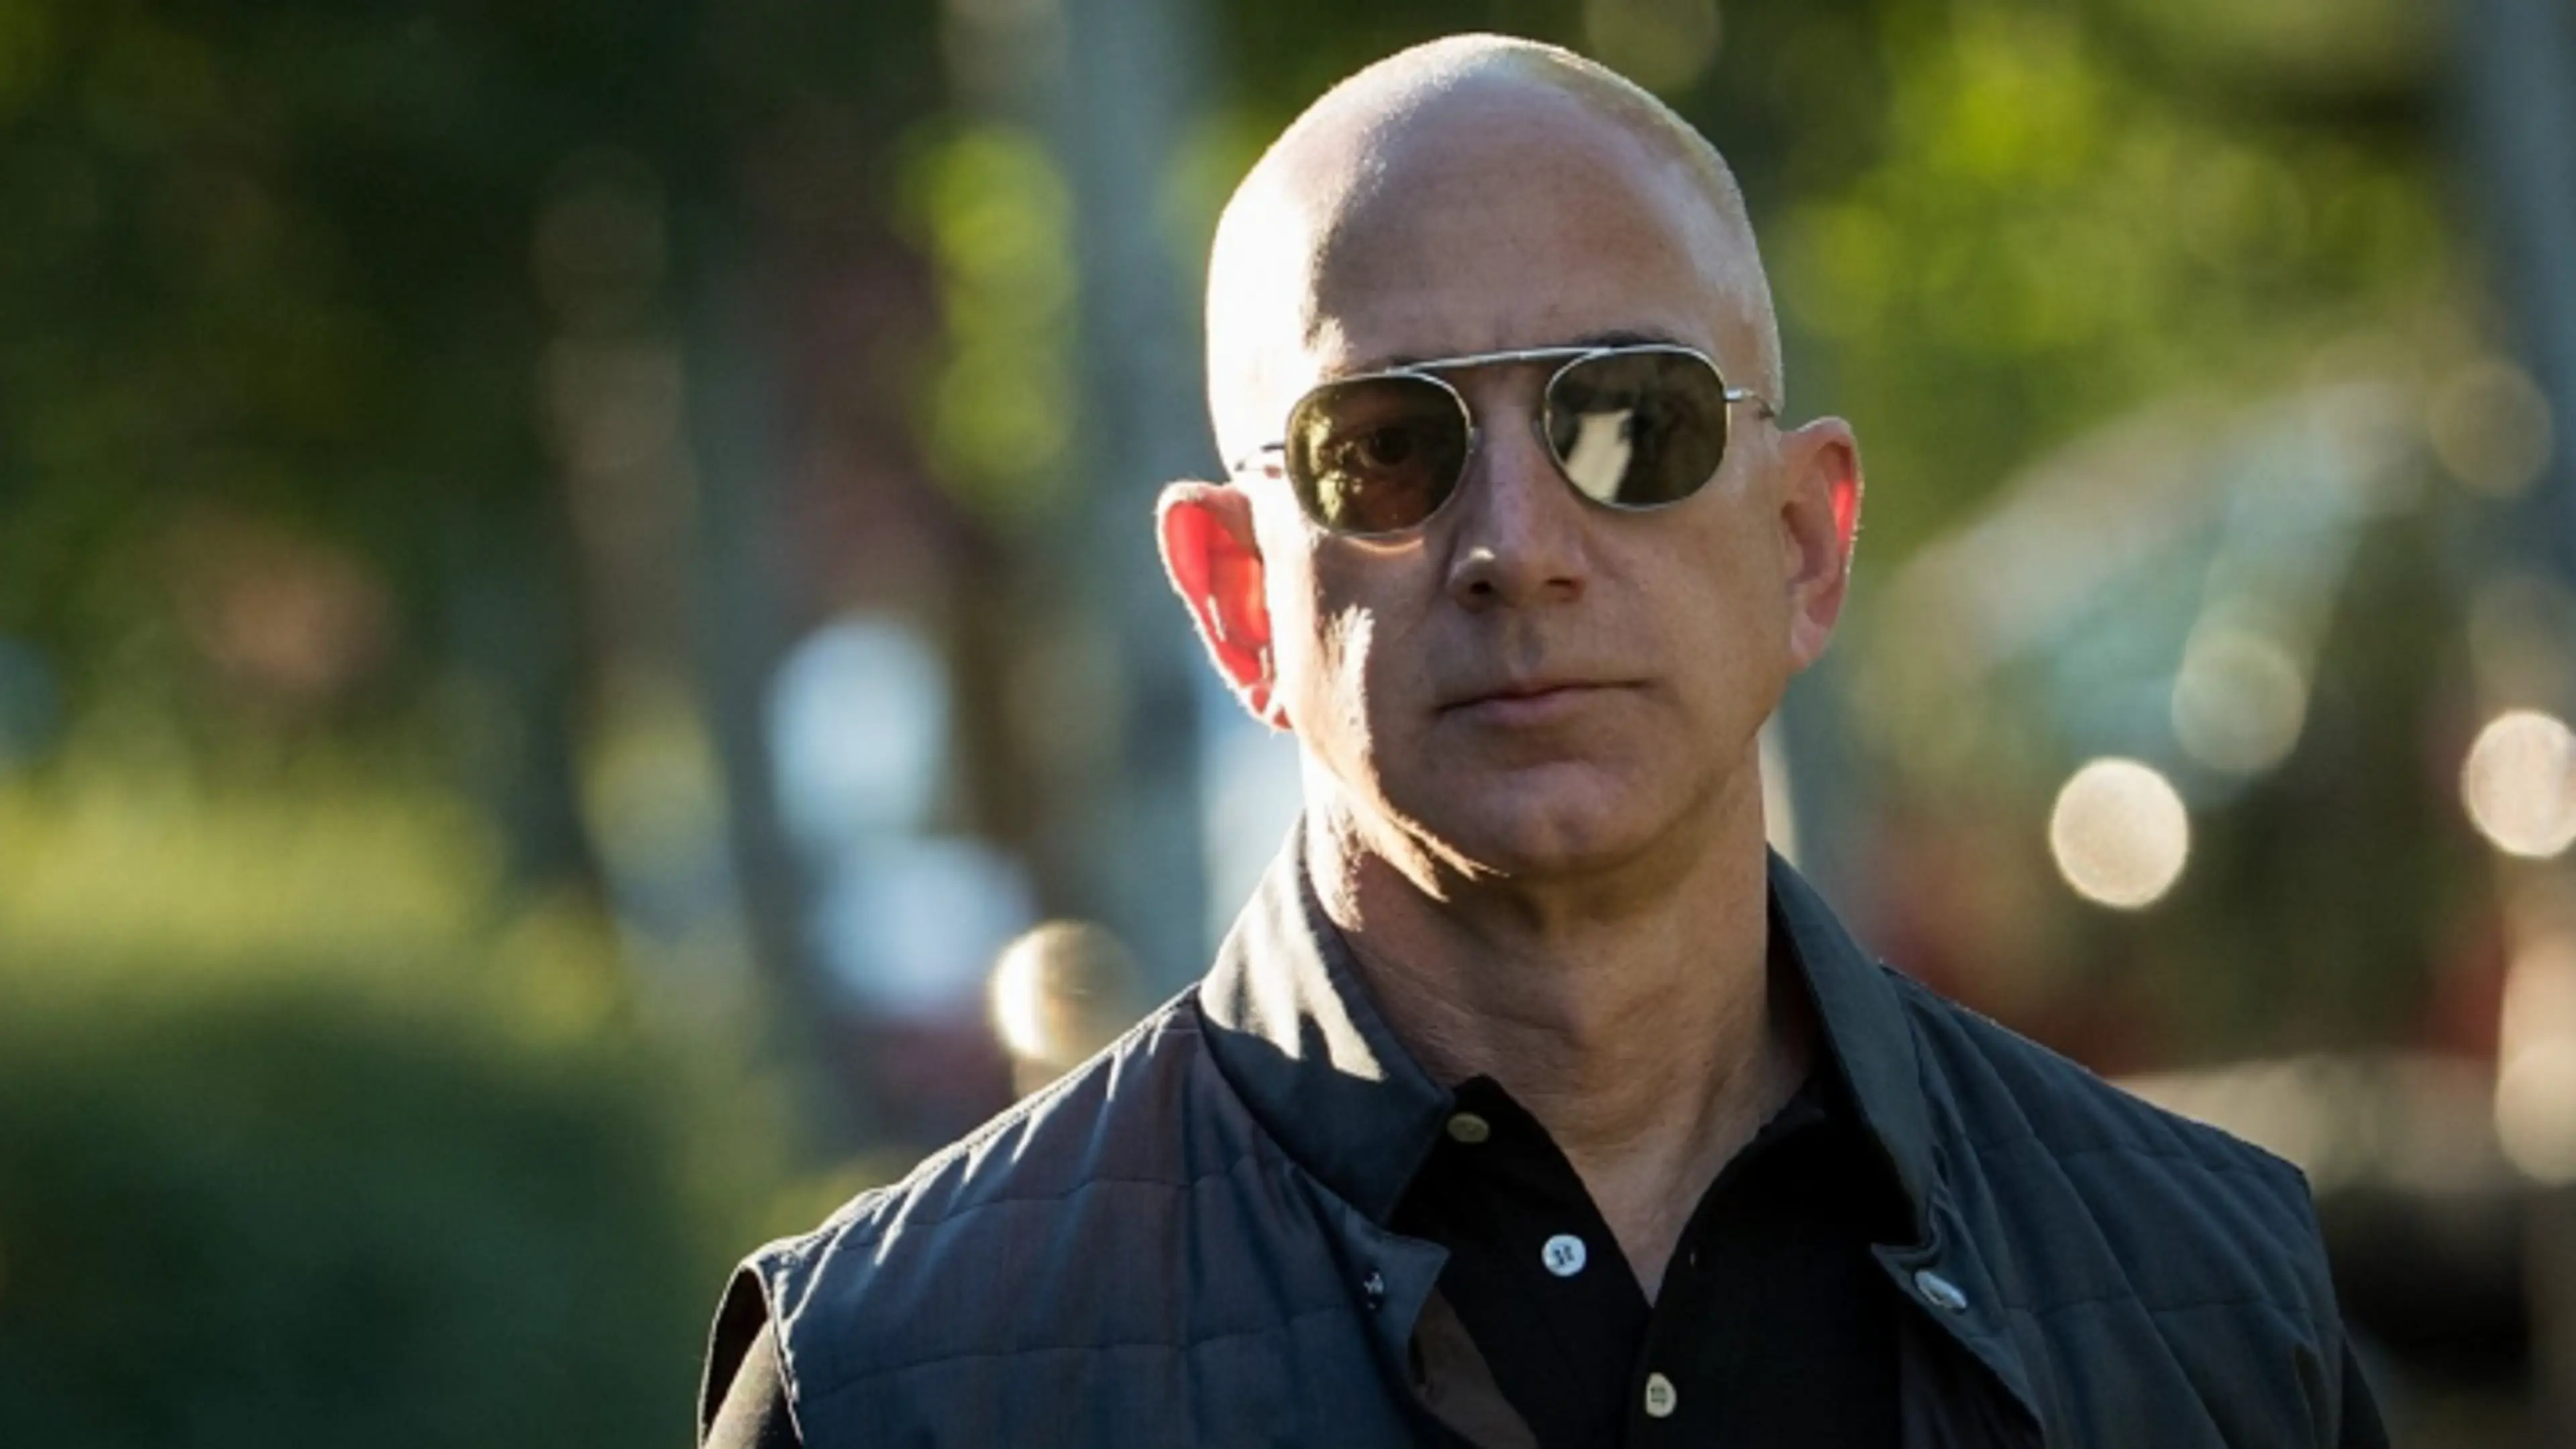 Jeff Bezos almost did not start up Amazon. Here's why